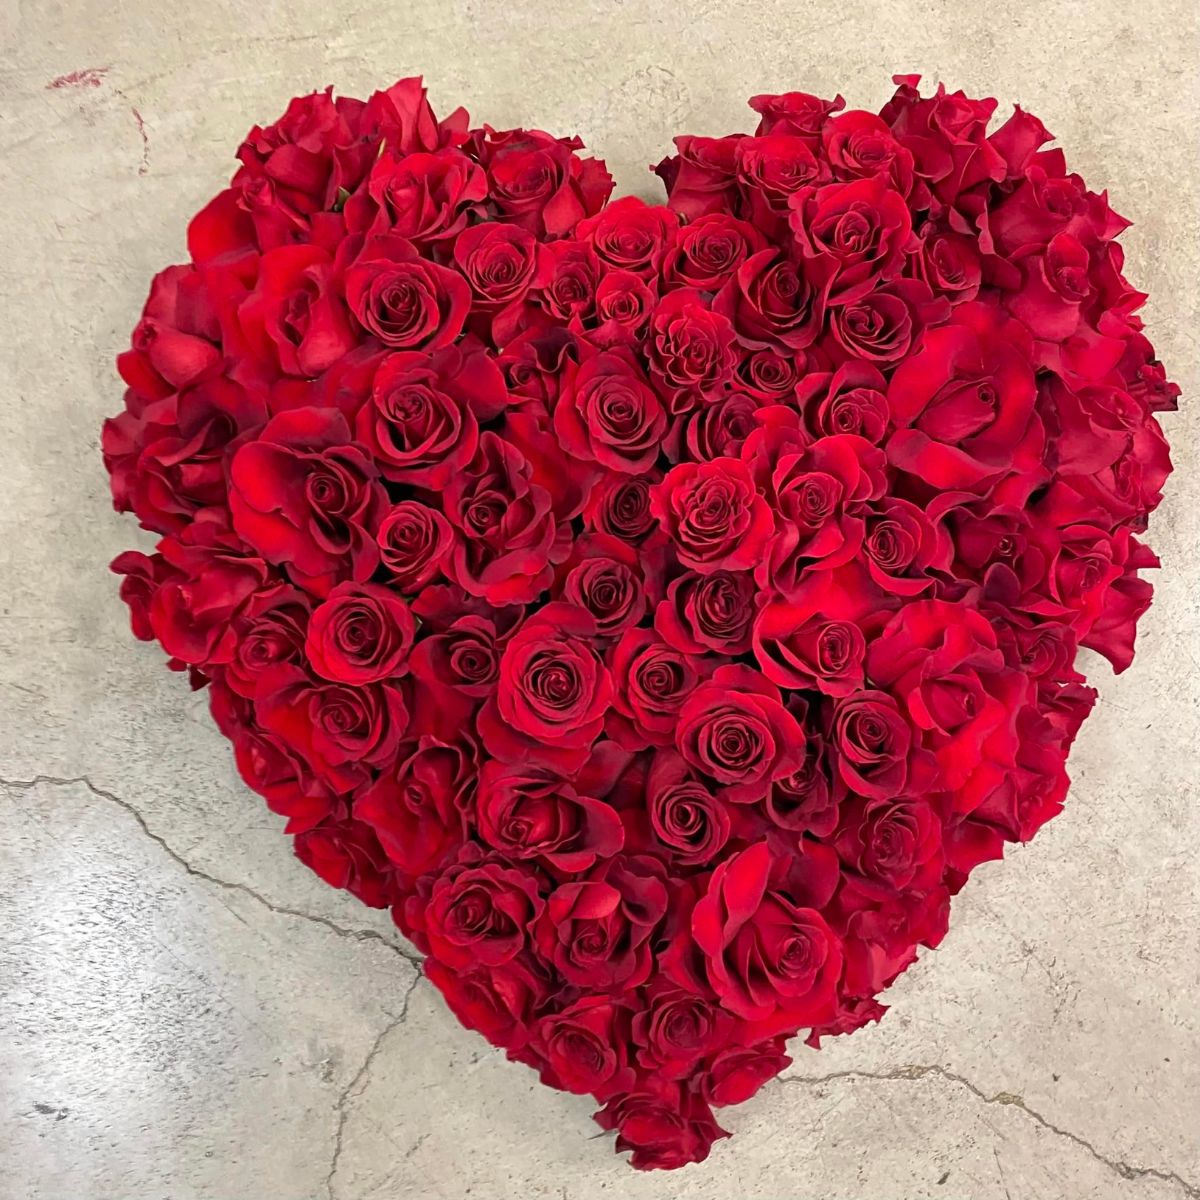 Red roses in heart shape is the most popular and romantic flower for vday